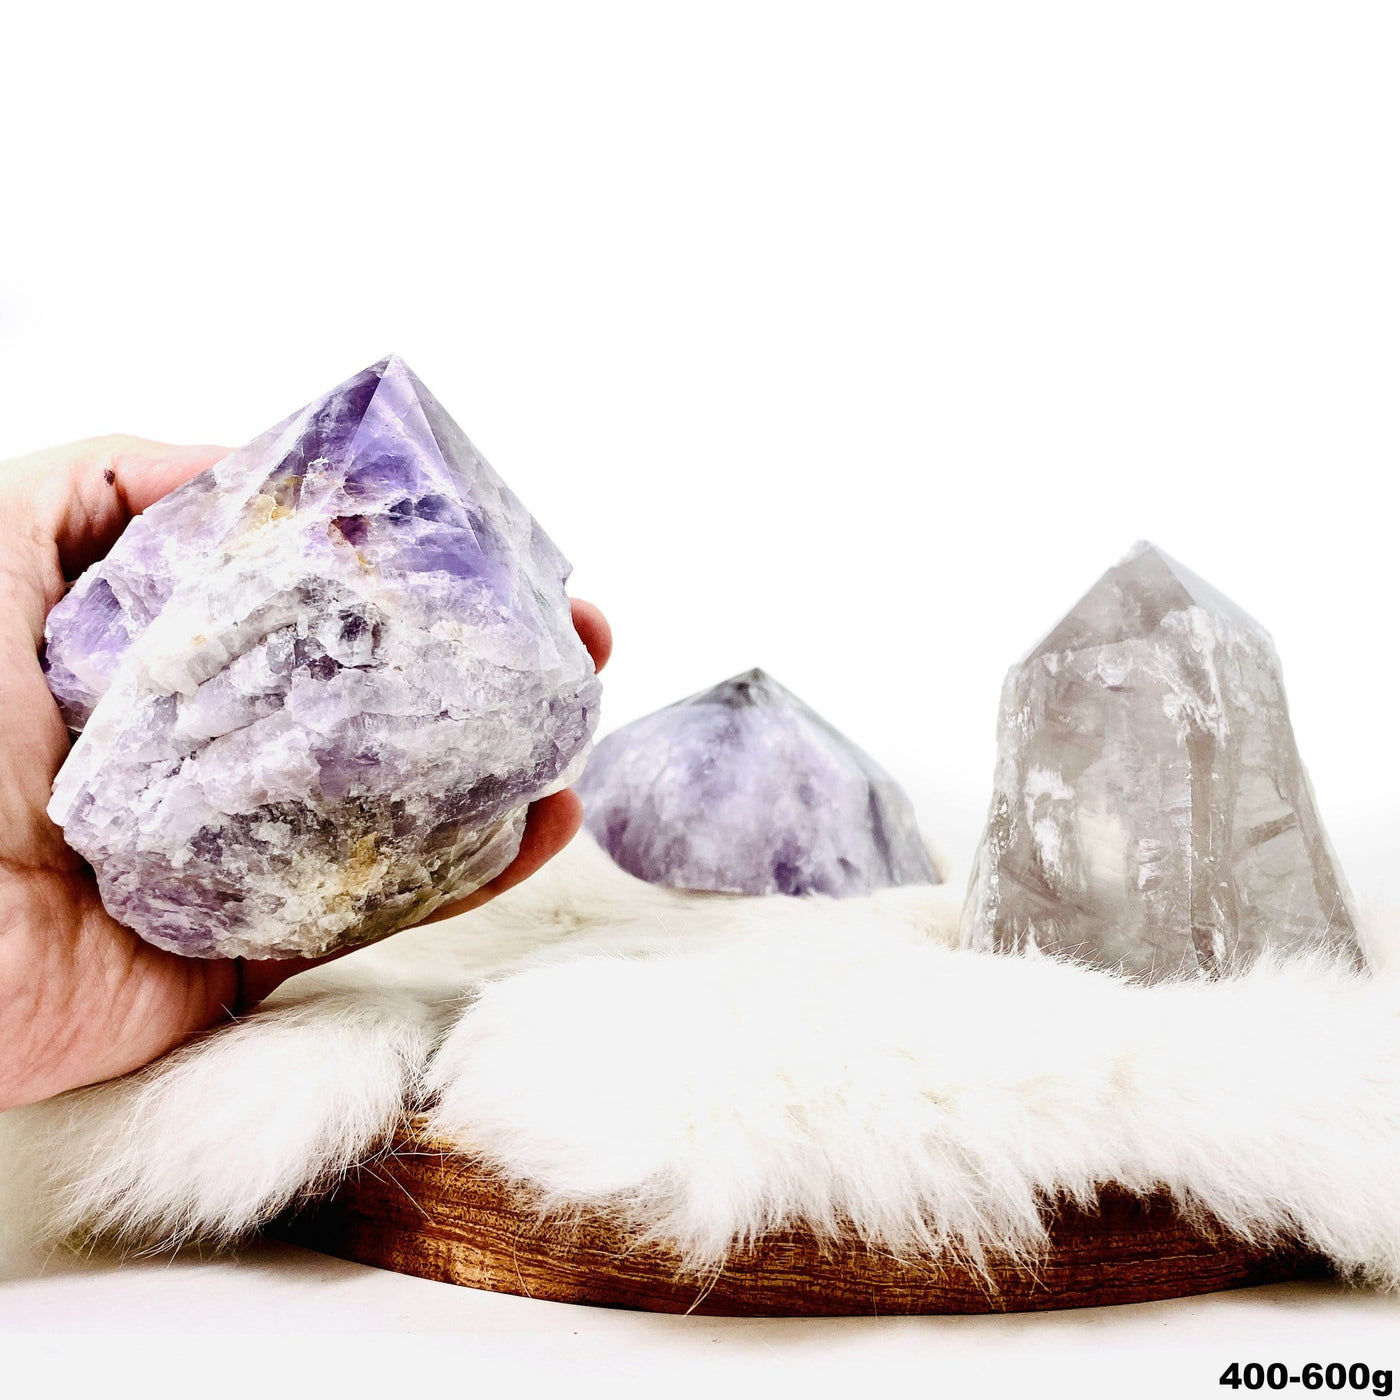 Picture of three amethyst ametrine semi polished points displayed on a fury surface.